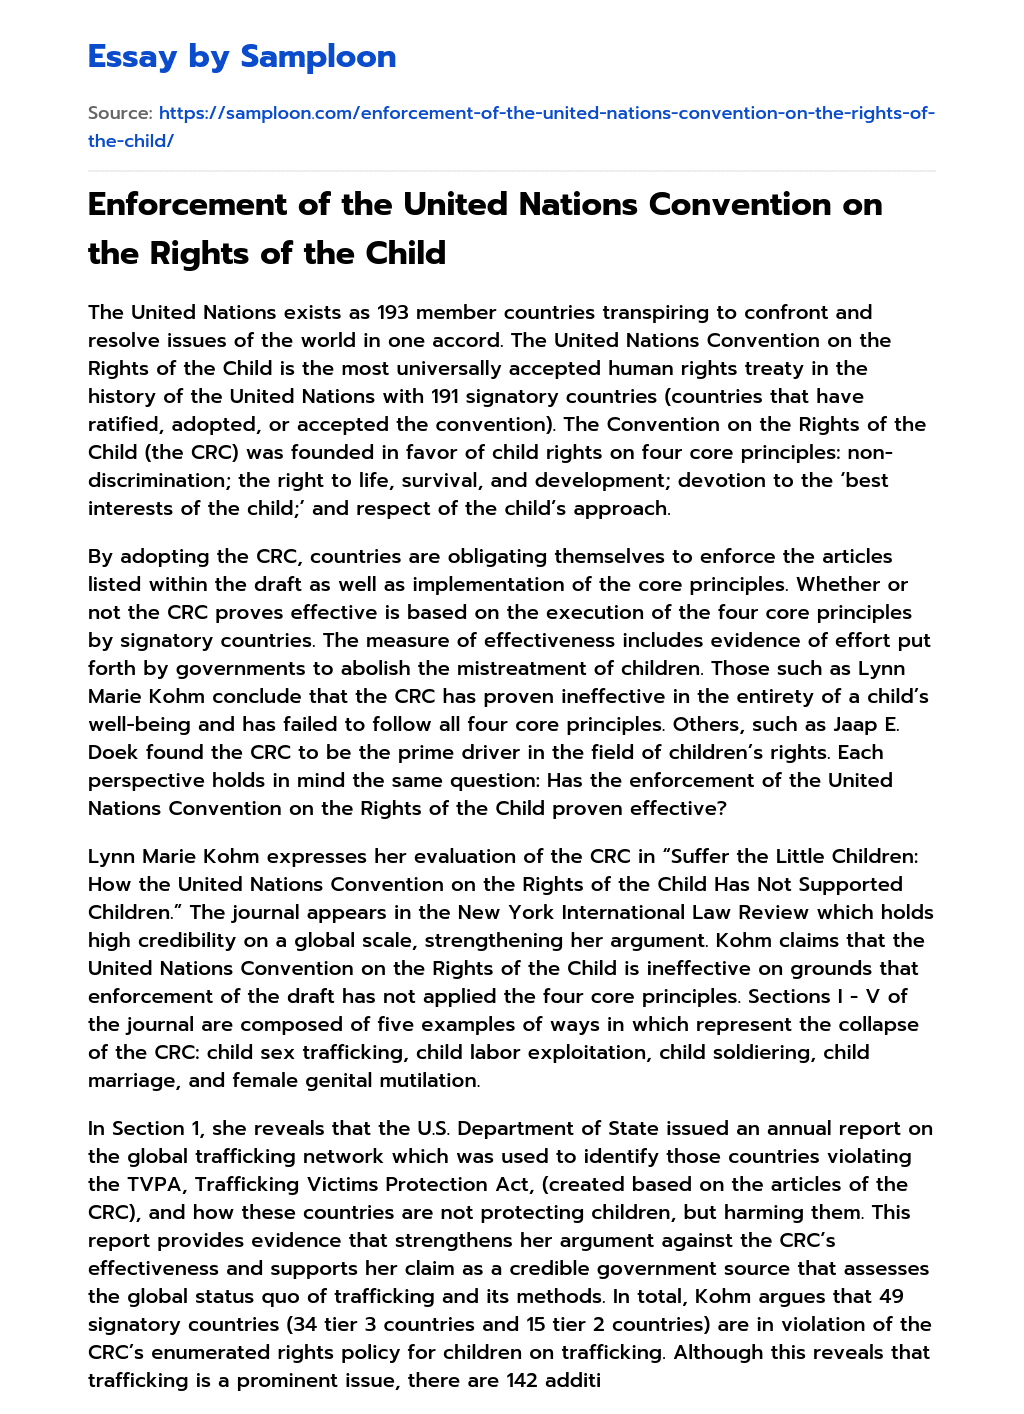 Enforcement of the United Nations Convention on the Rights of the Child essay